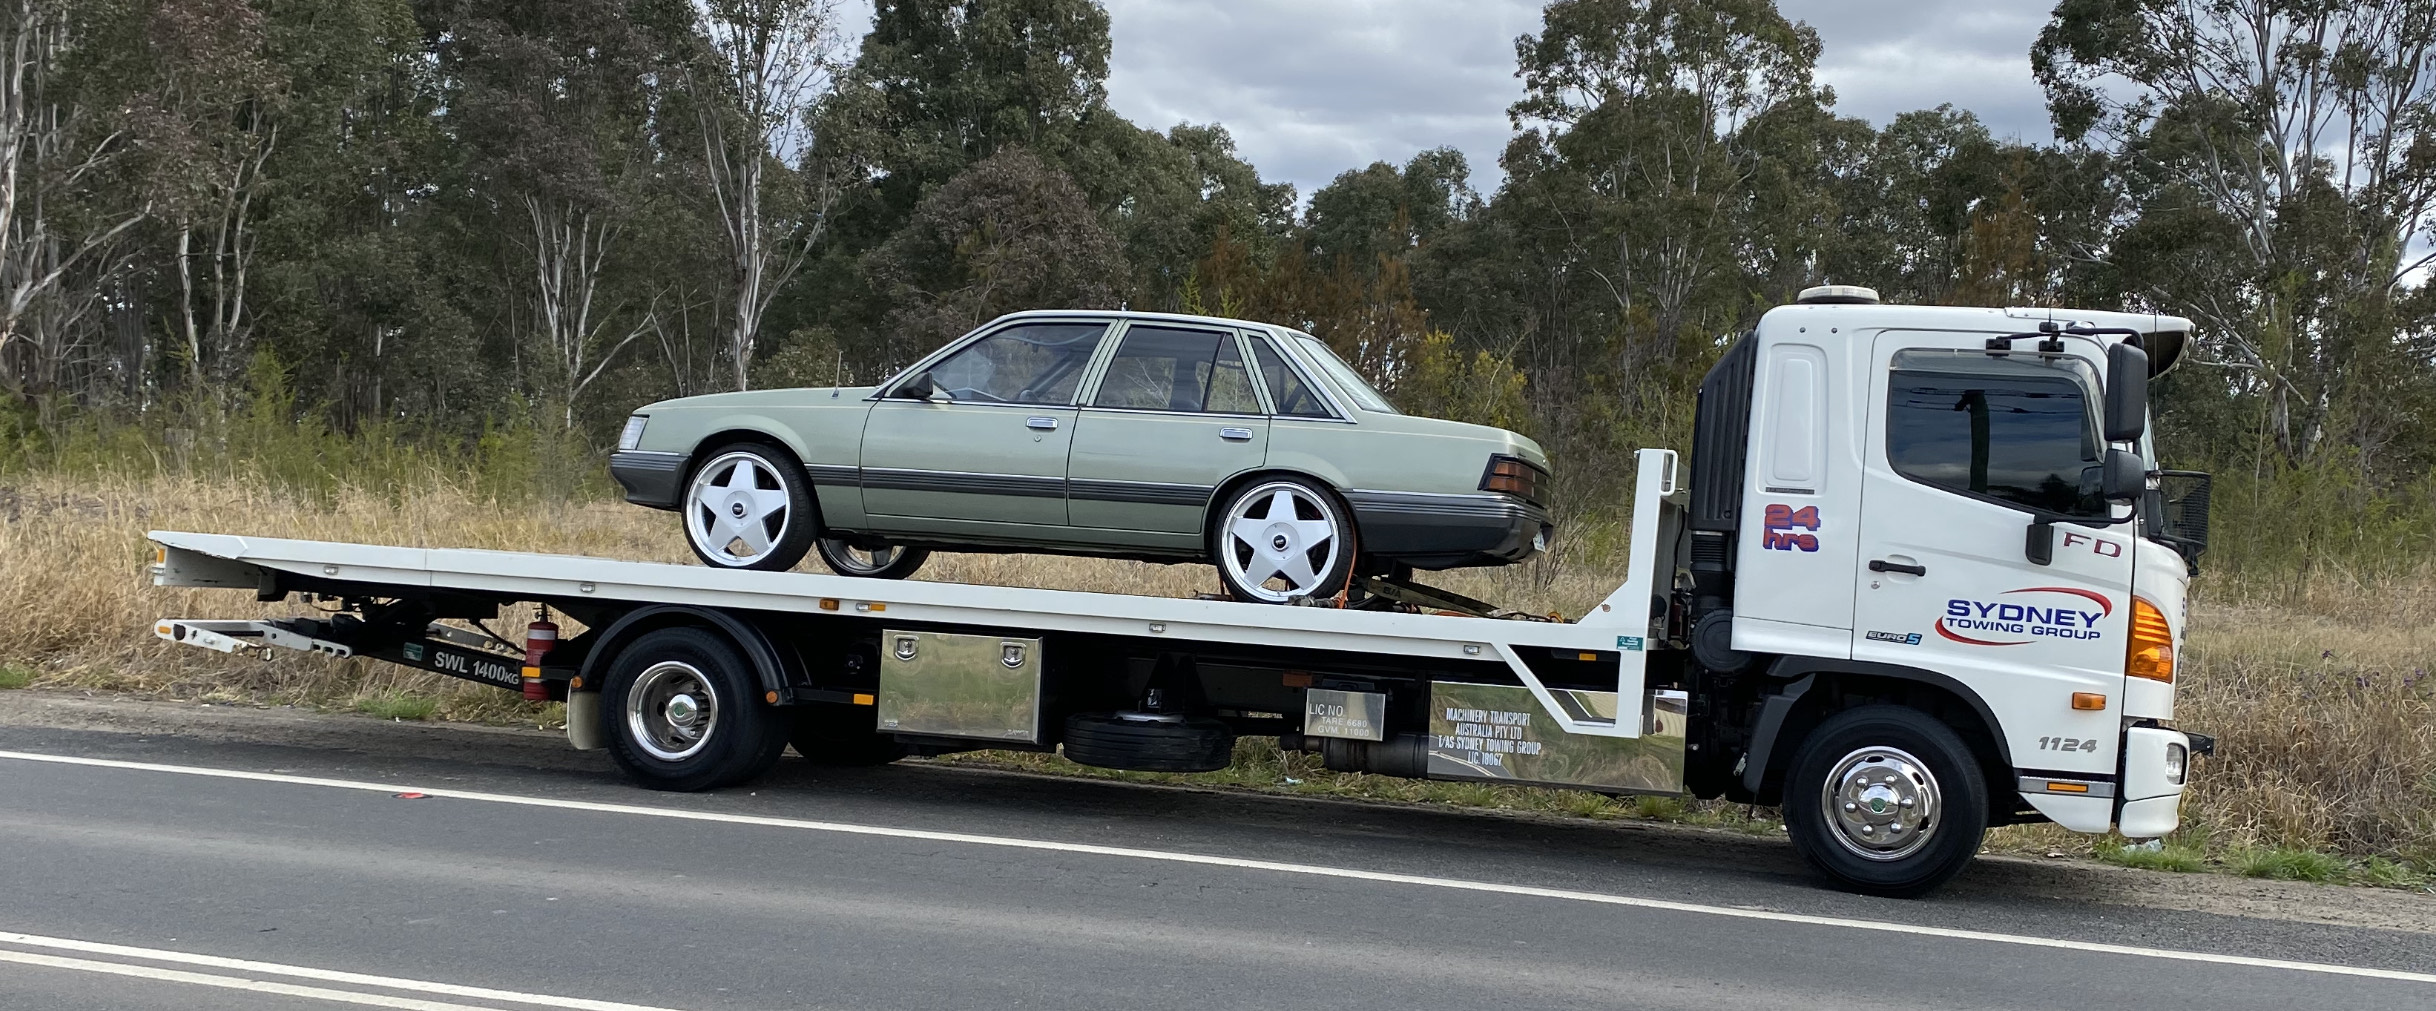 Sydney Towing Group Car Towing 